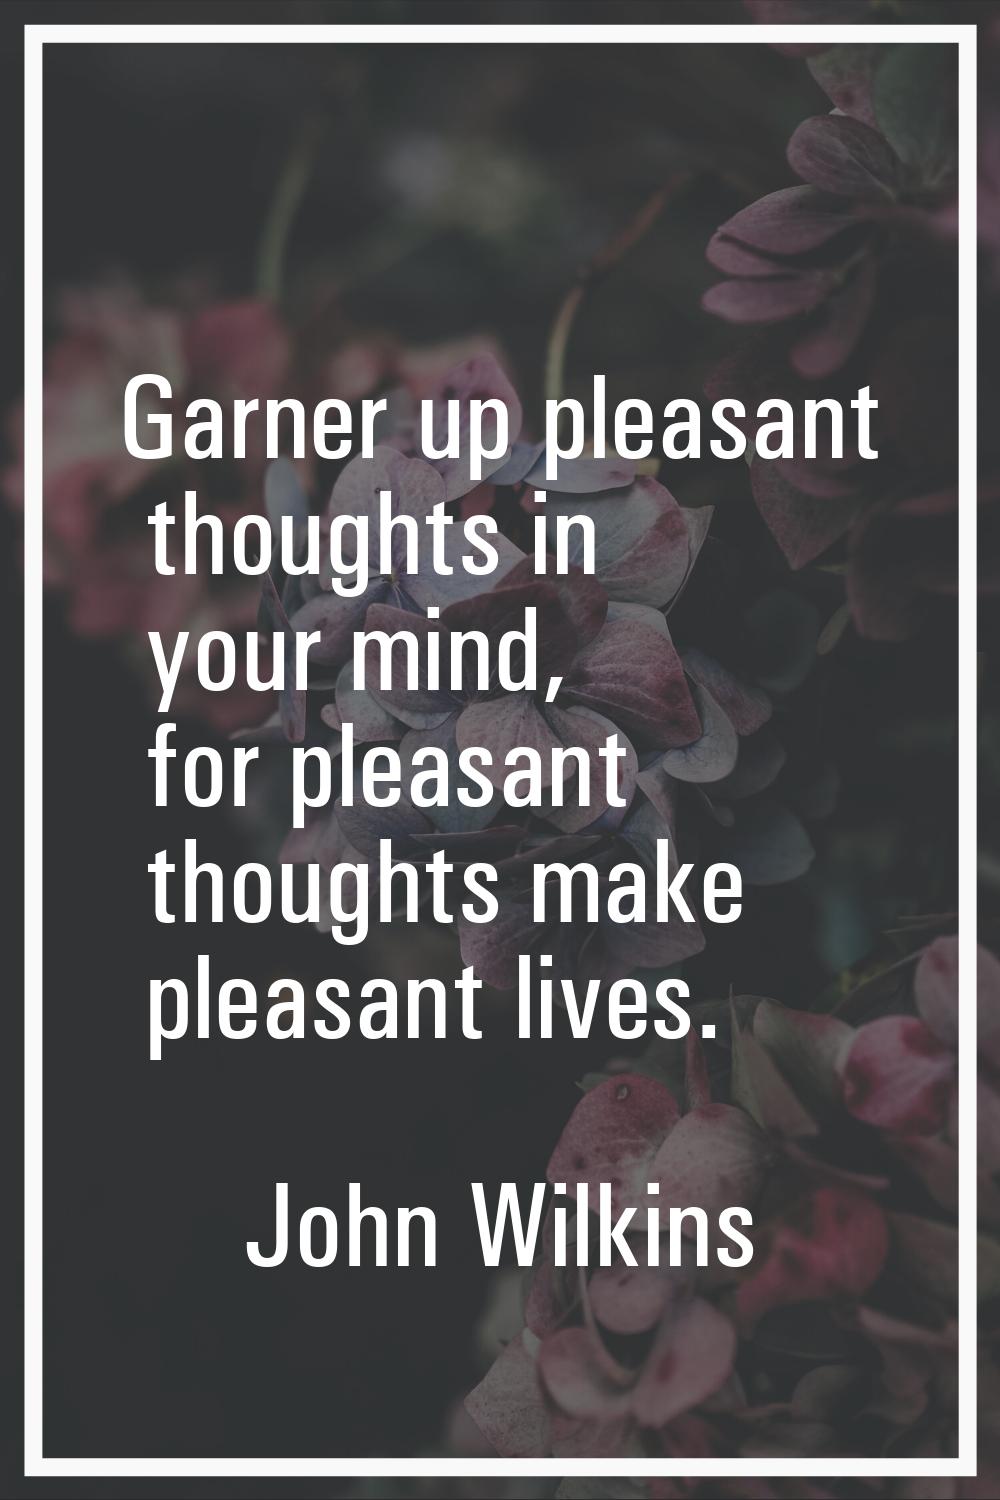 Garner up pleasant thoughts in your mind, for pleasant thoughts make pleasant lives.